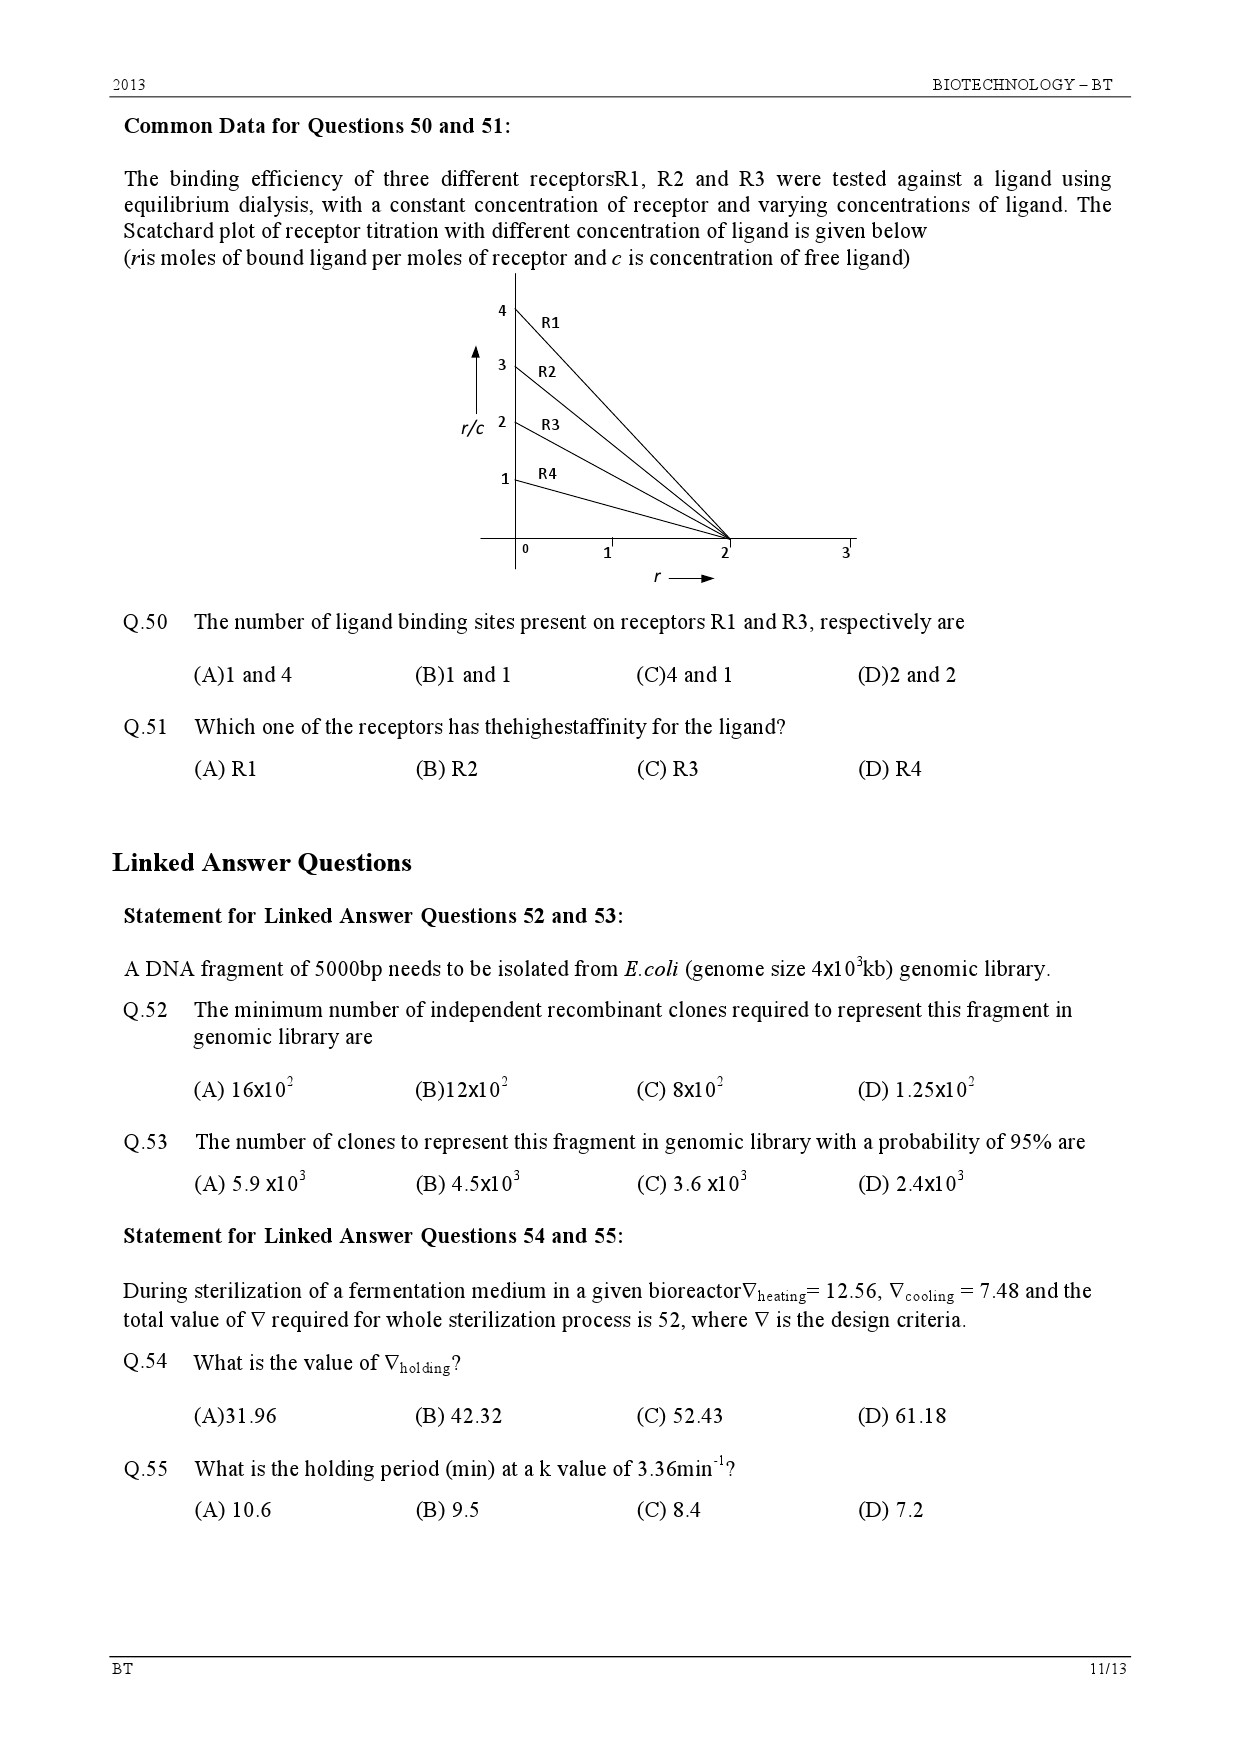 GATE Exam Question Paper 2013 Biotechnology 11